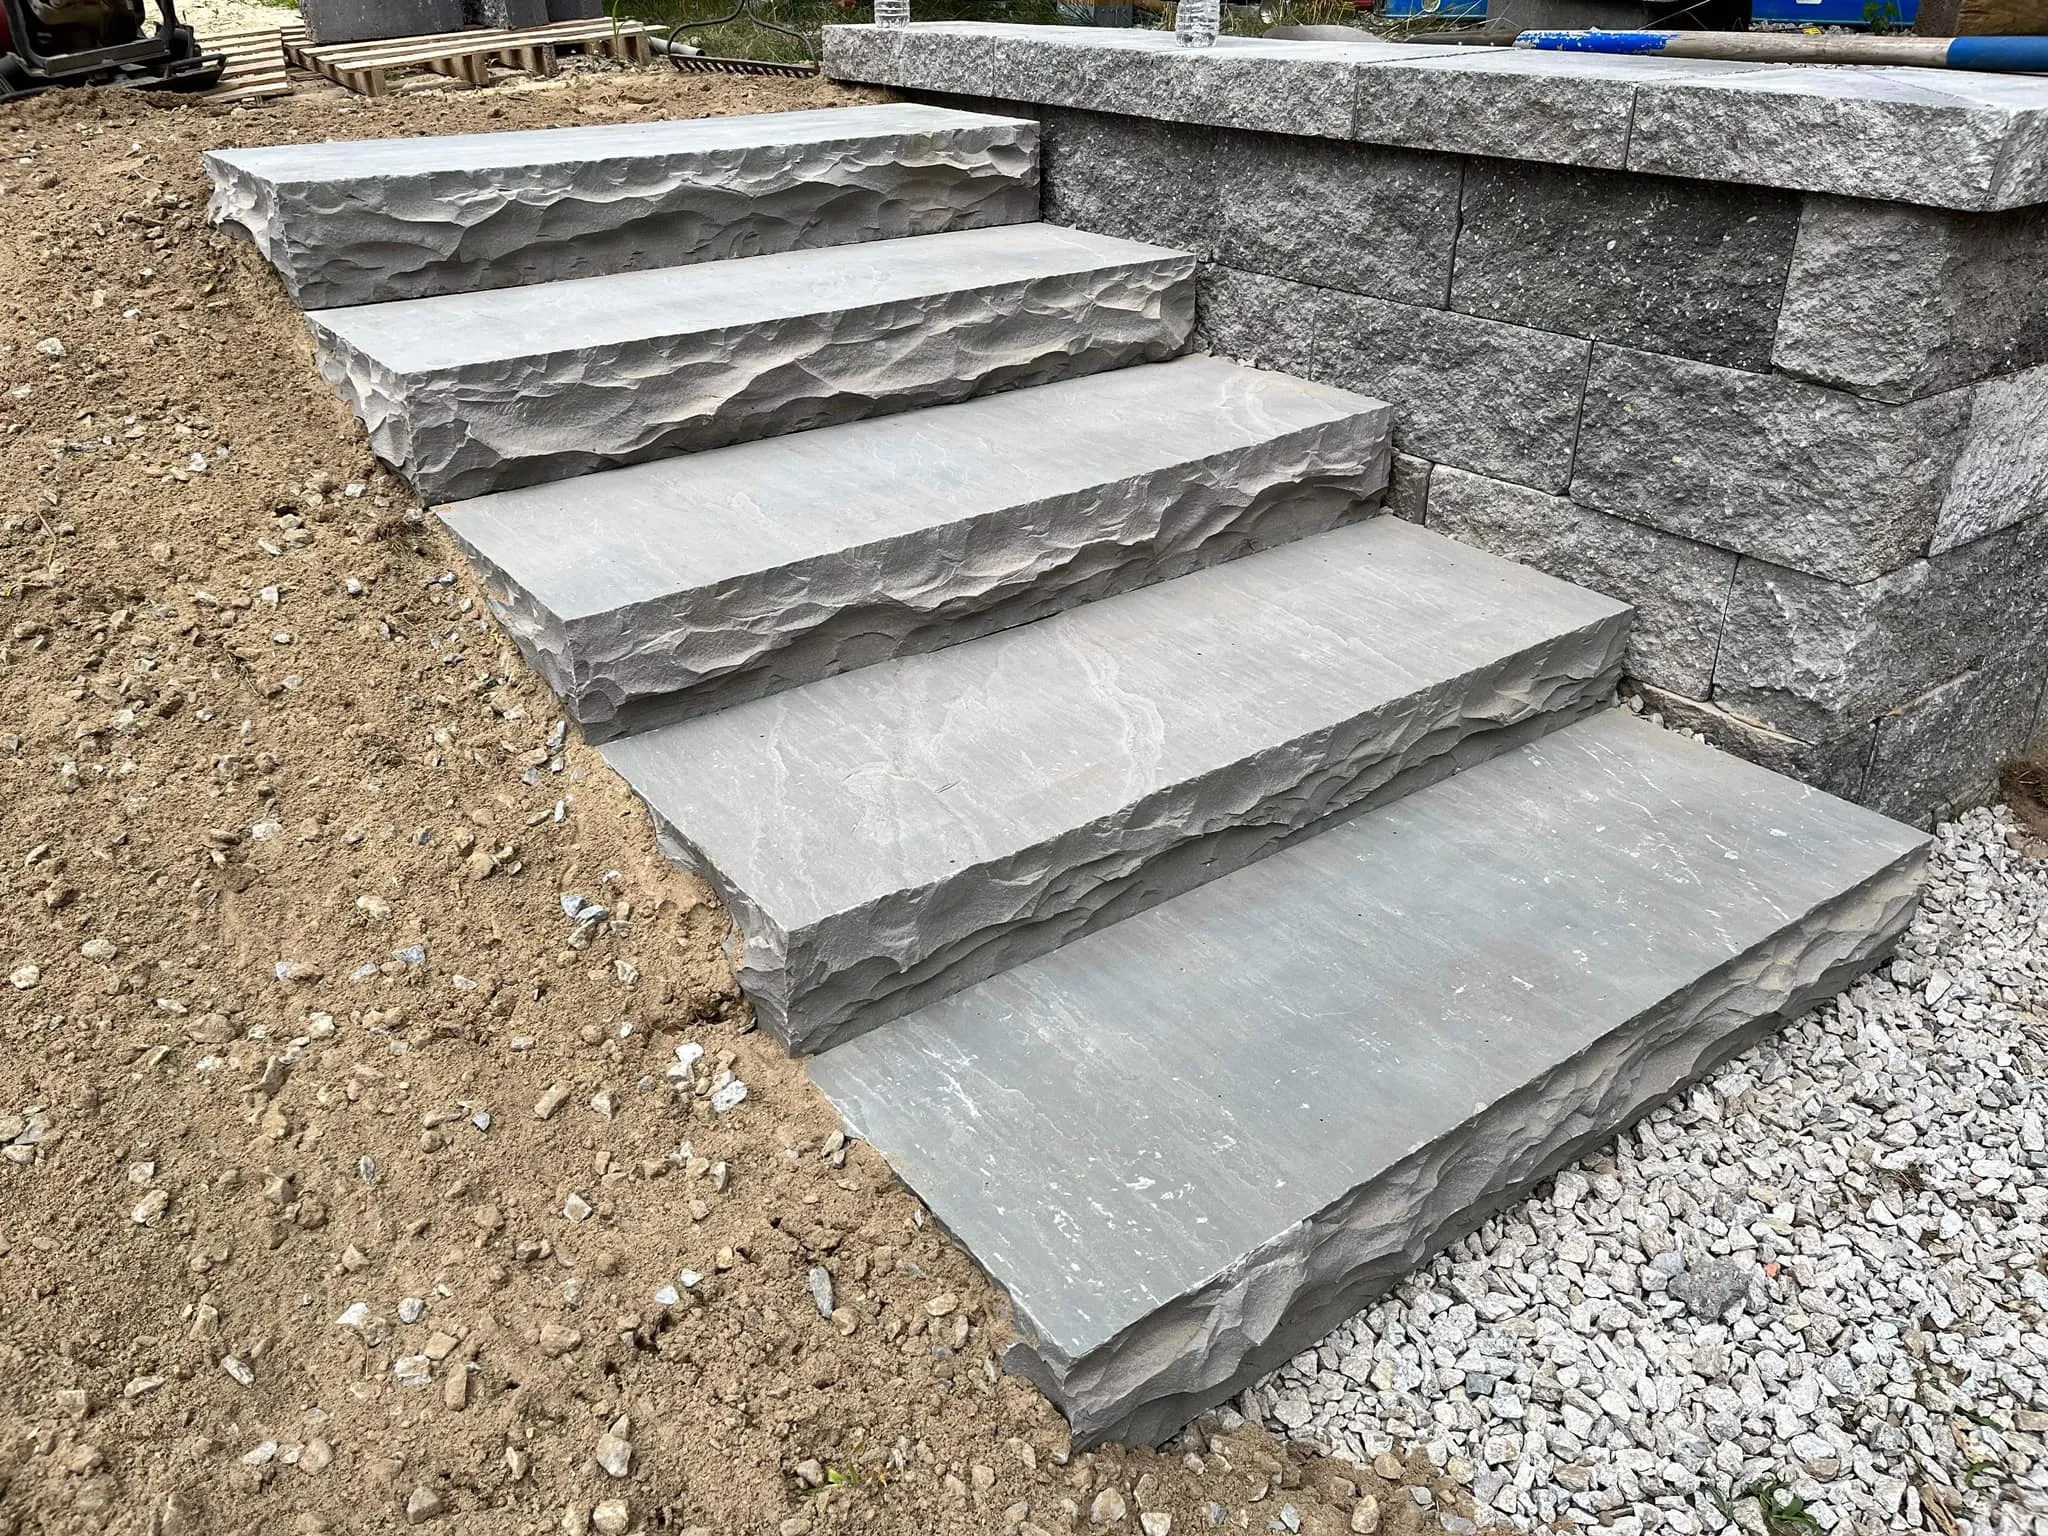 Patio Design & Construction for Fernald Landscaping in Chelmsford, MA